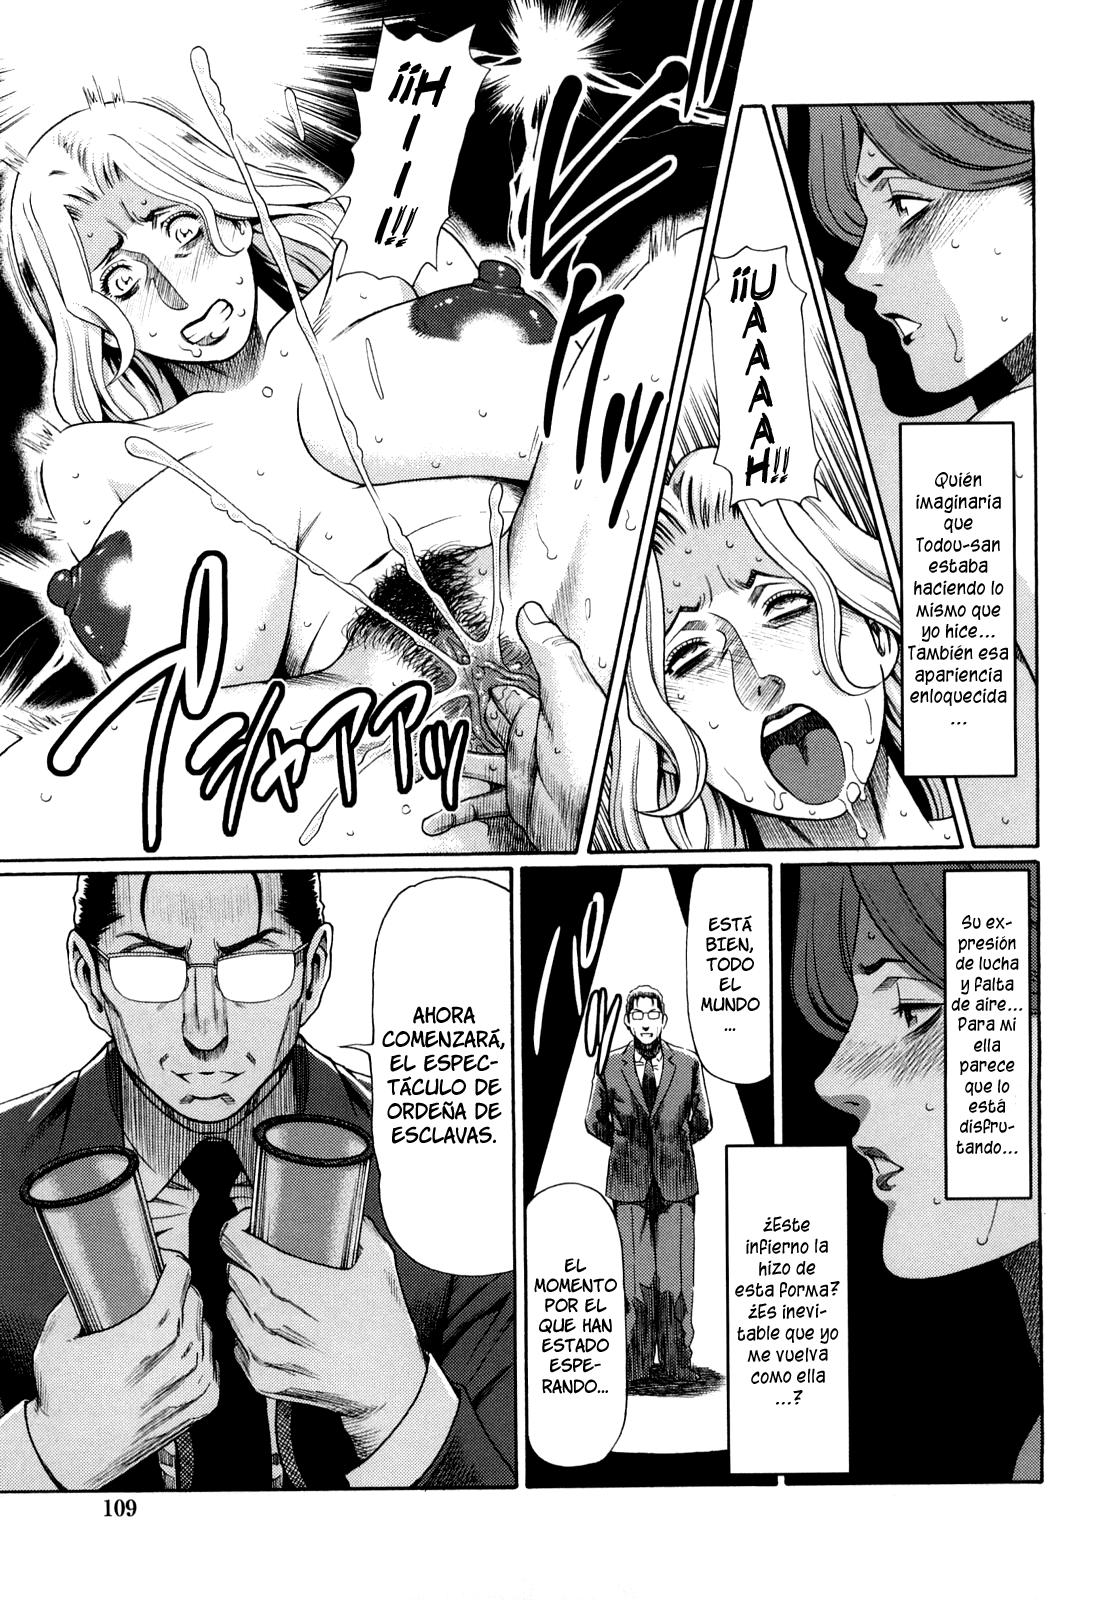 Immorality Love-Hole Completo (Sin Censura) Chapter-7 - 8